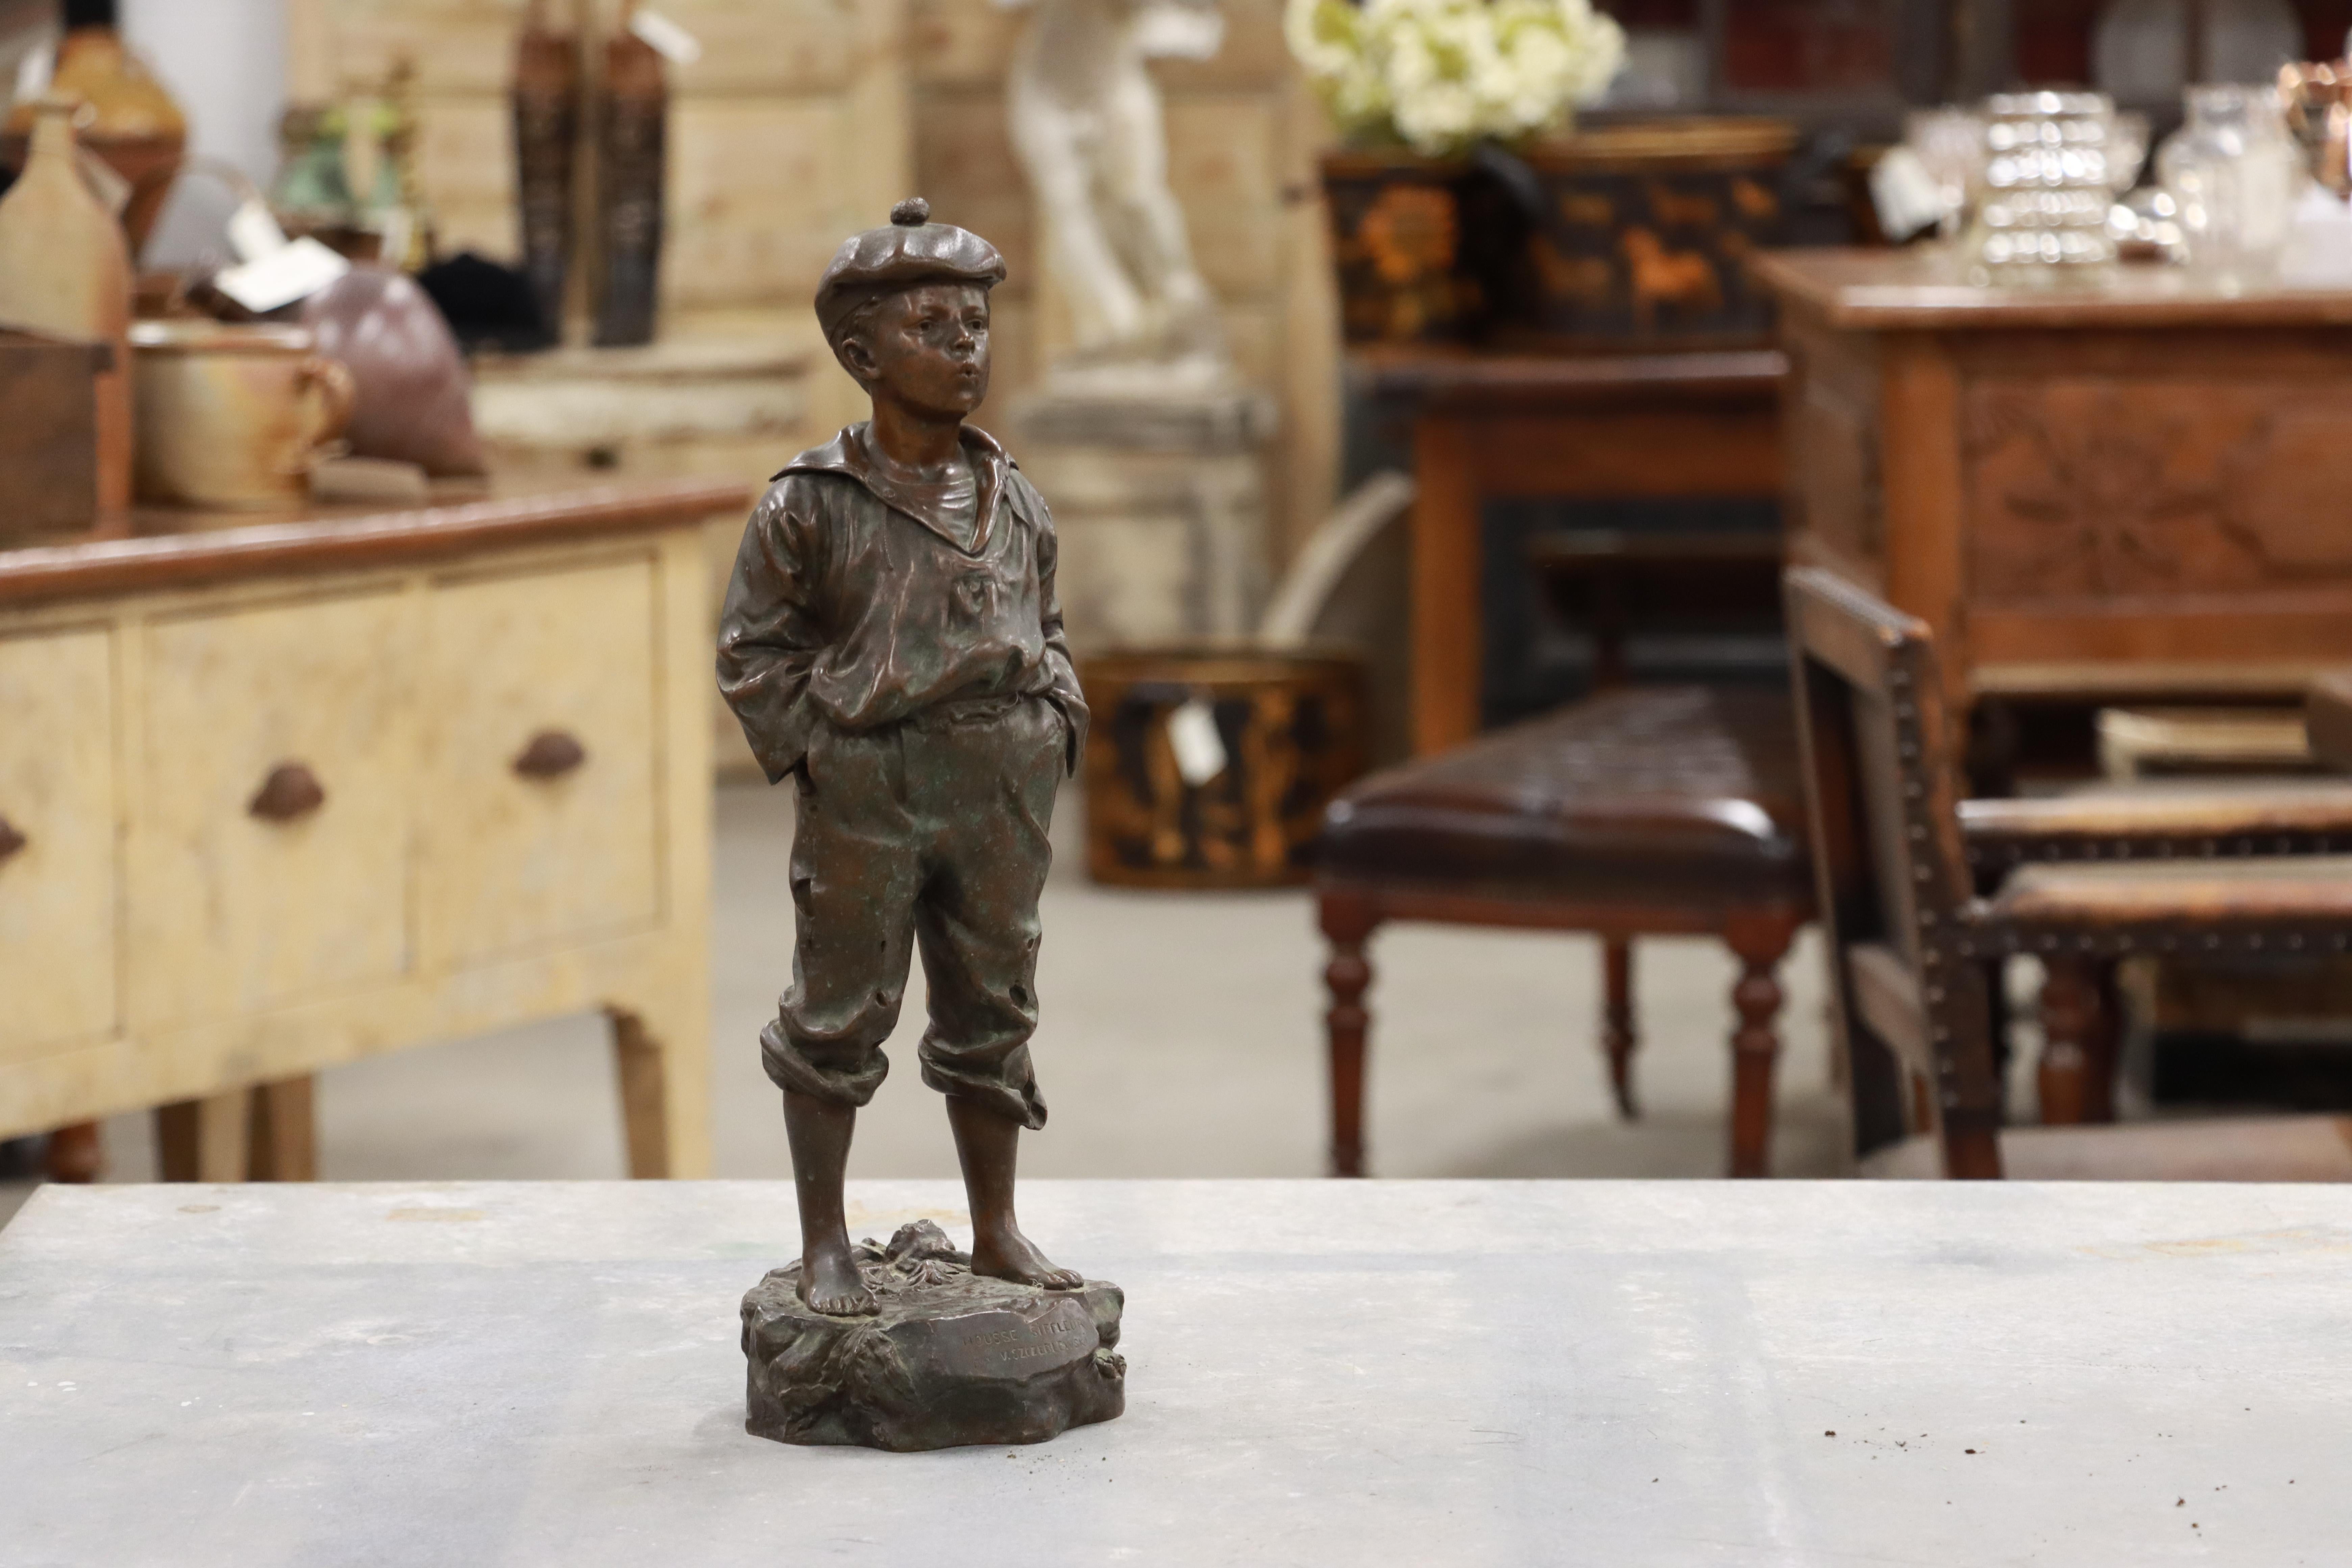 Charming antique patinated bronze sculpture of a young boy 